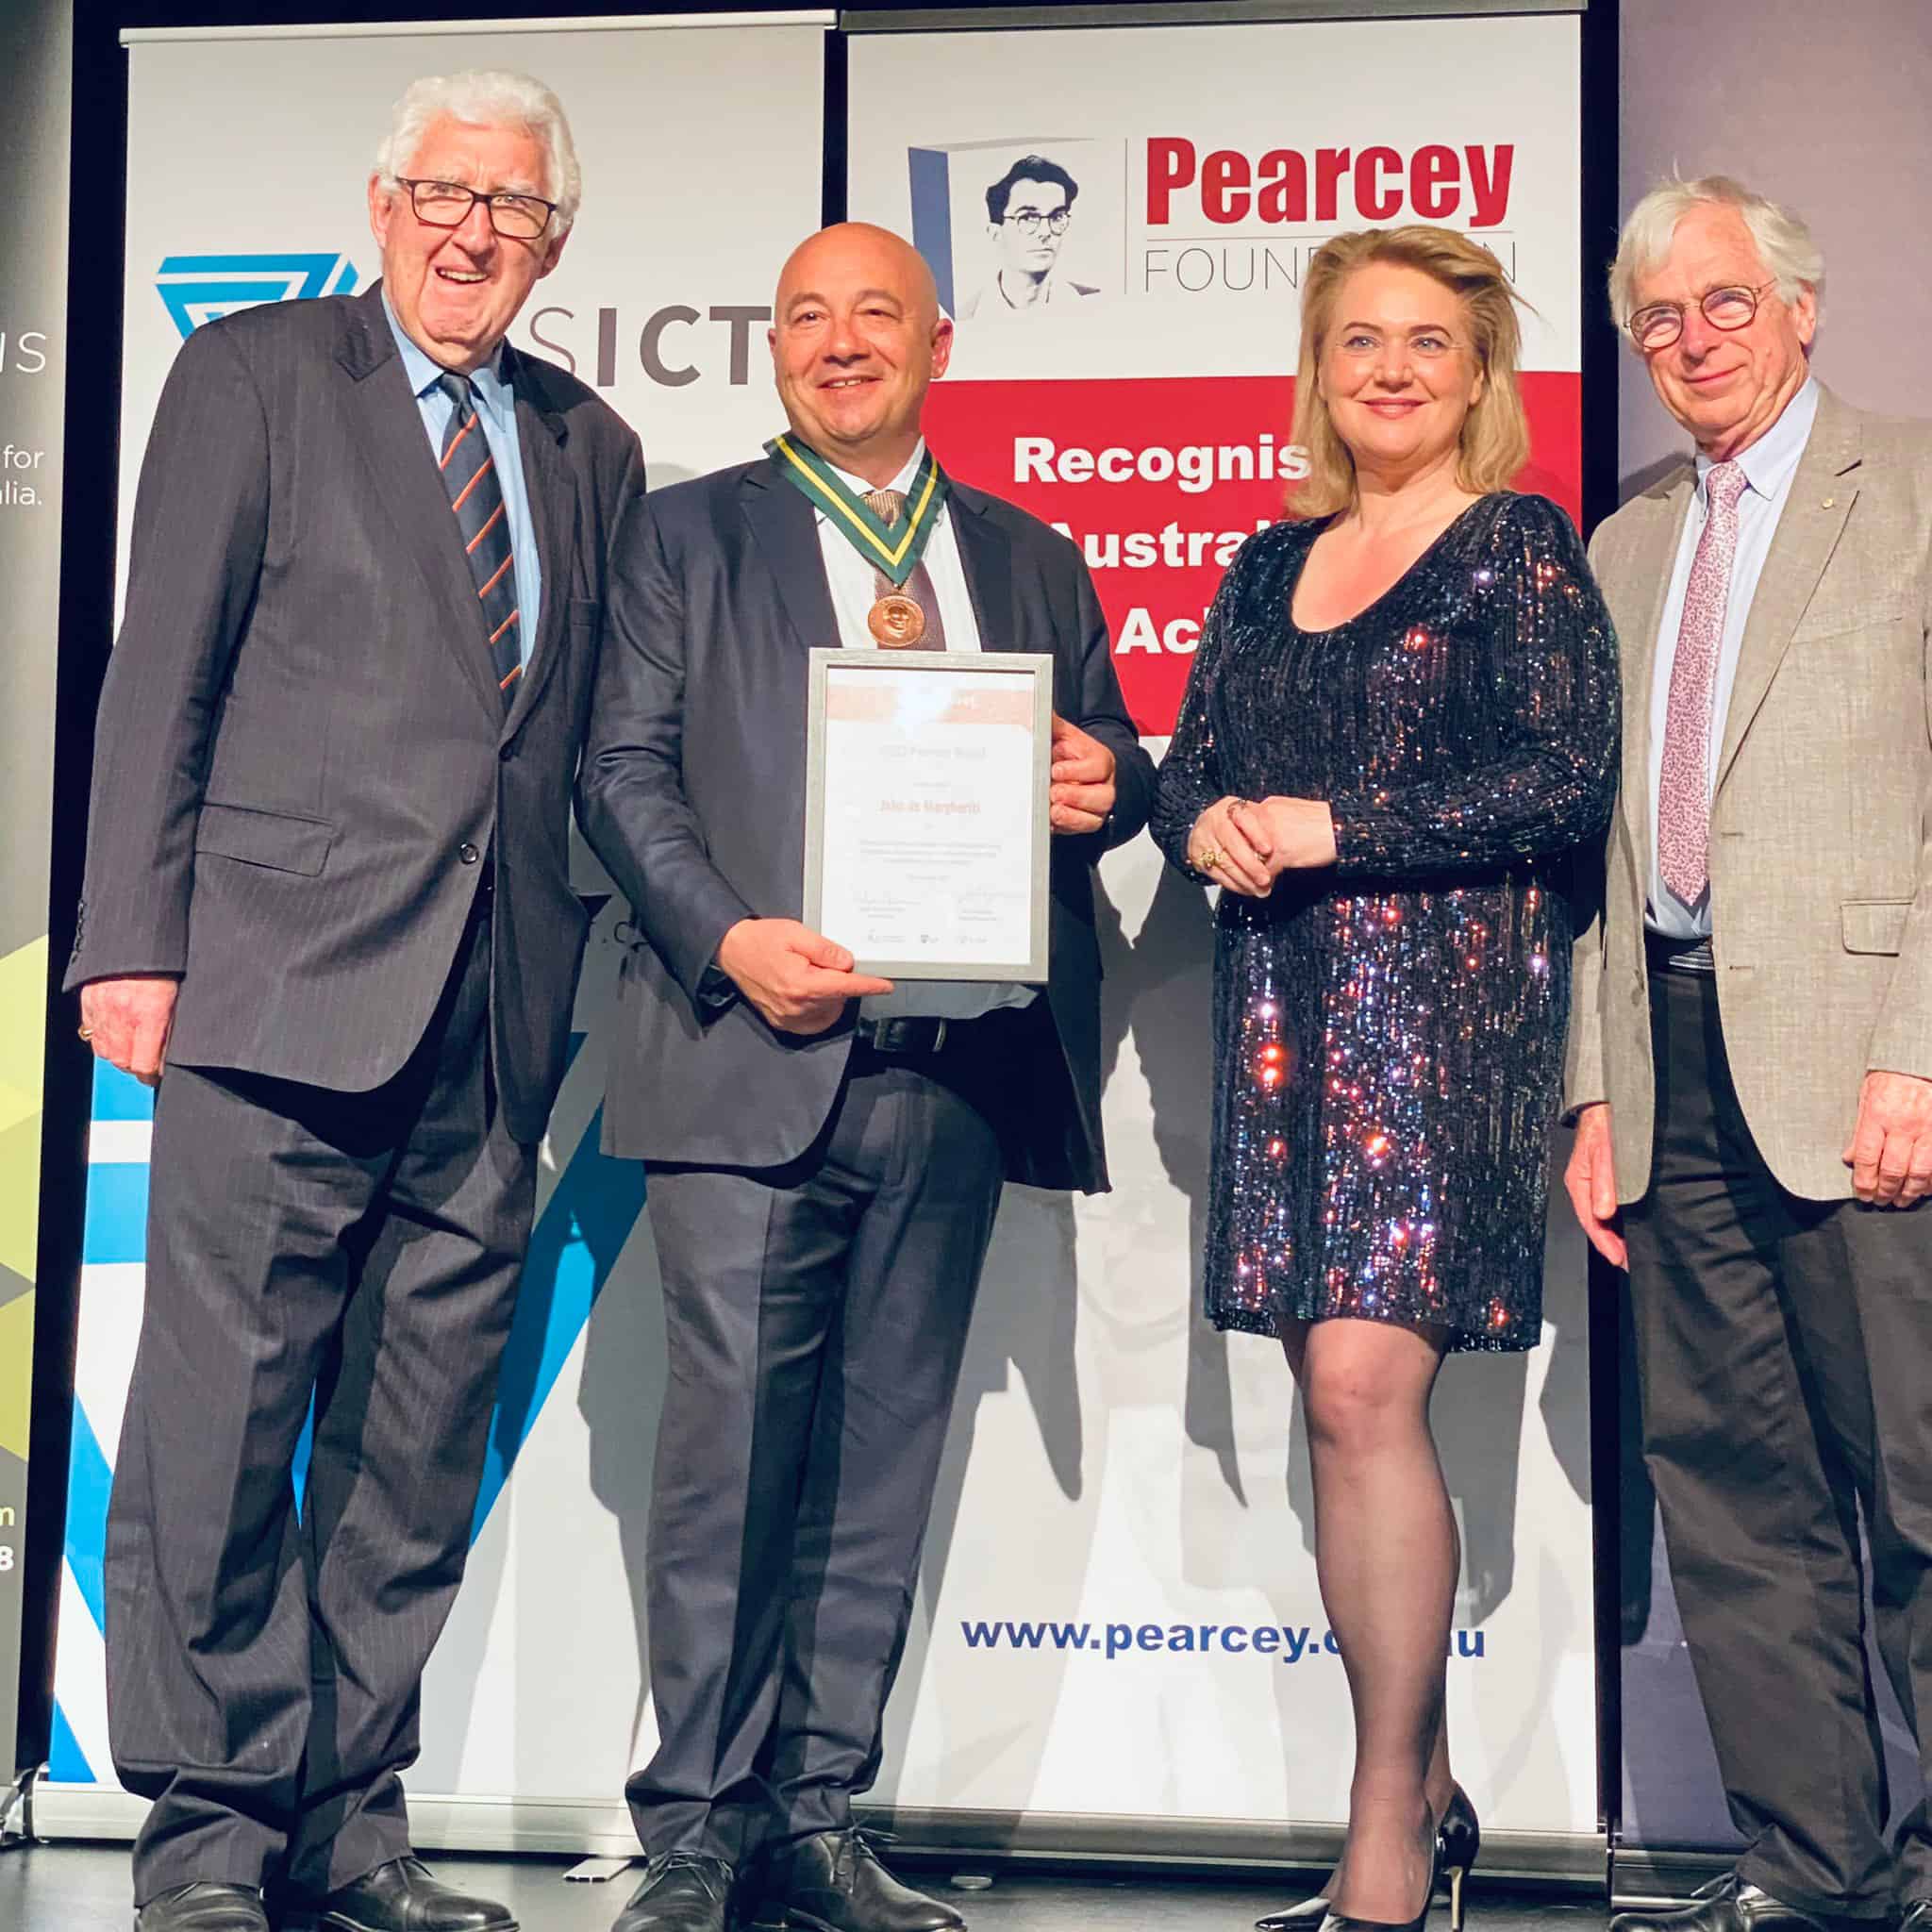 John De Margheriti, recipient of the 2022 Pearcey Medal and 2022 Hall of Fame inductees Len Rust and Bevan Slattery with Tasmanian Minister for Science & Technology Madeleine Ogilvie MP and Wayne Fitzsimmons,  Chair of the Pearcey Foundation.